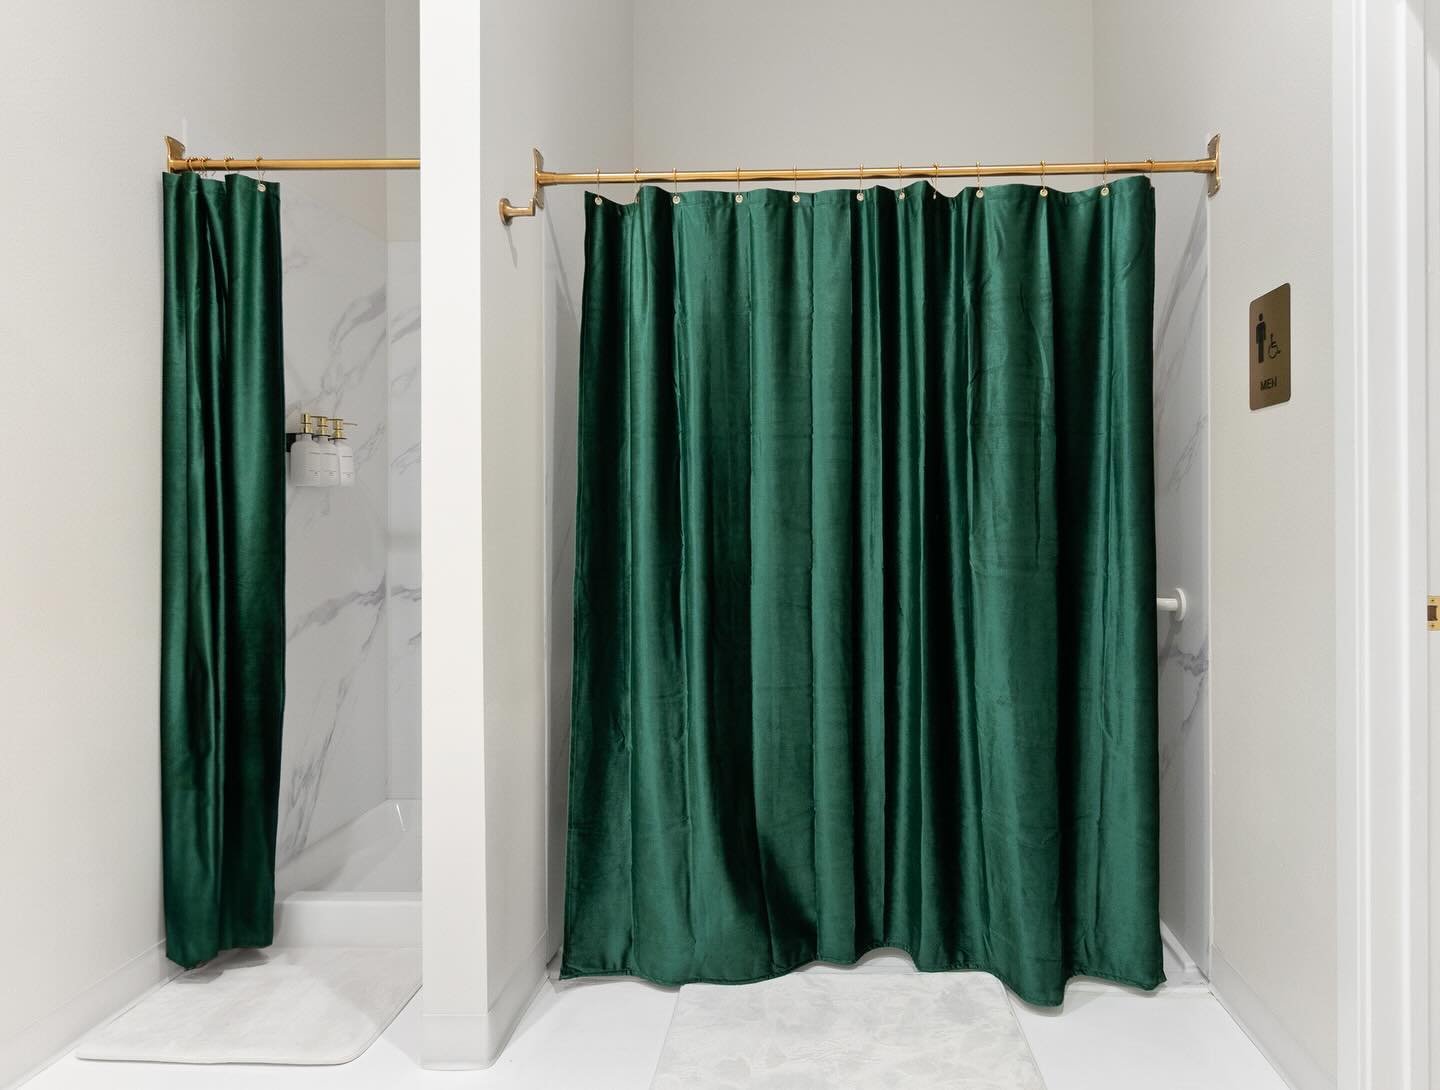 Did you know? We have showers 🚿✨

Our changing rooms are an oasis of convenience and luxury! Perfect for rinsing off after class. Whether you&rsquo;re gearing up for the day ahead or winding down after a sweat session, feel the stress melt away as y